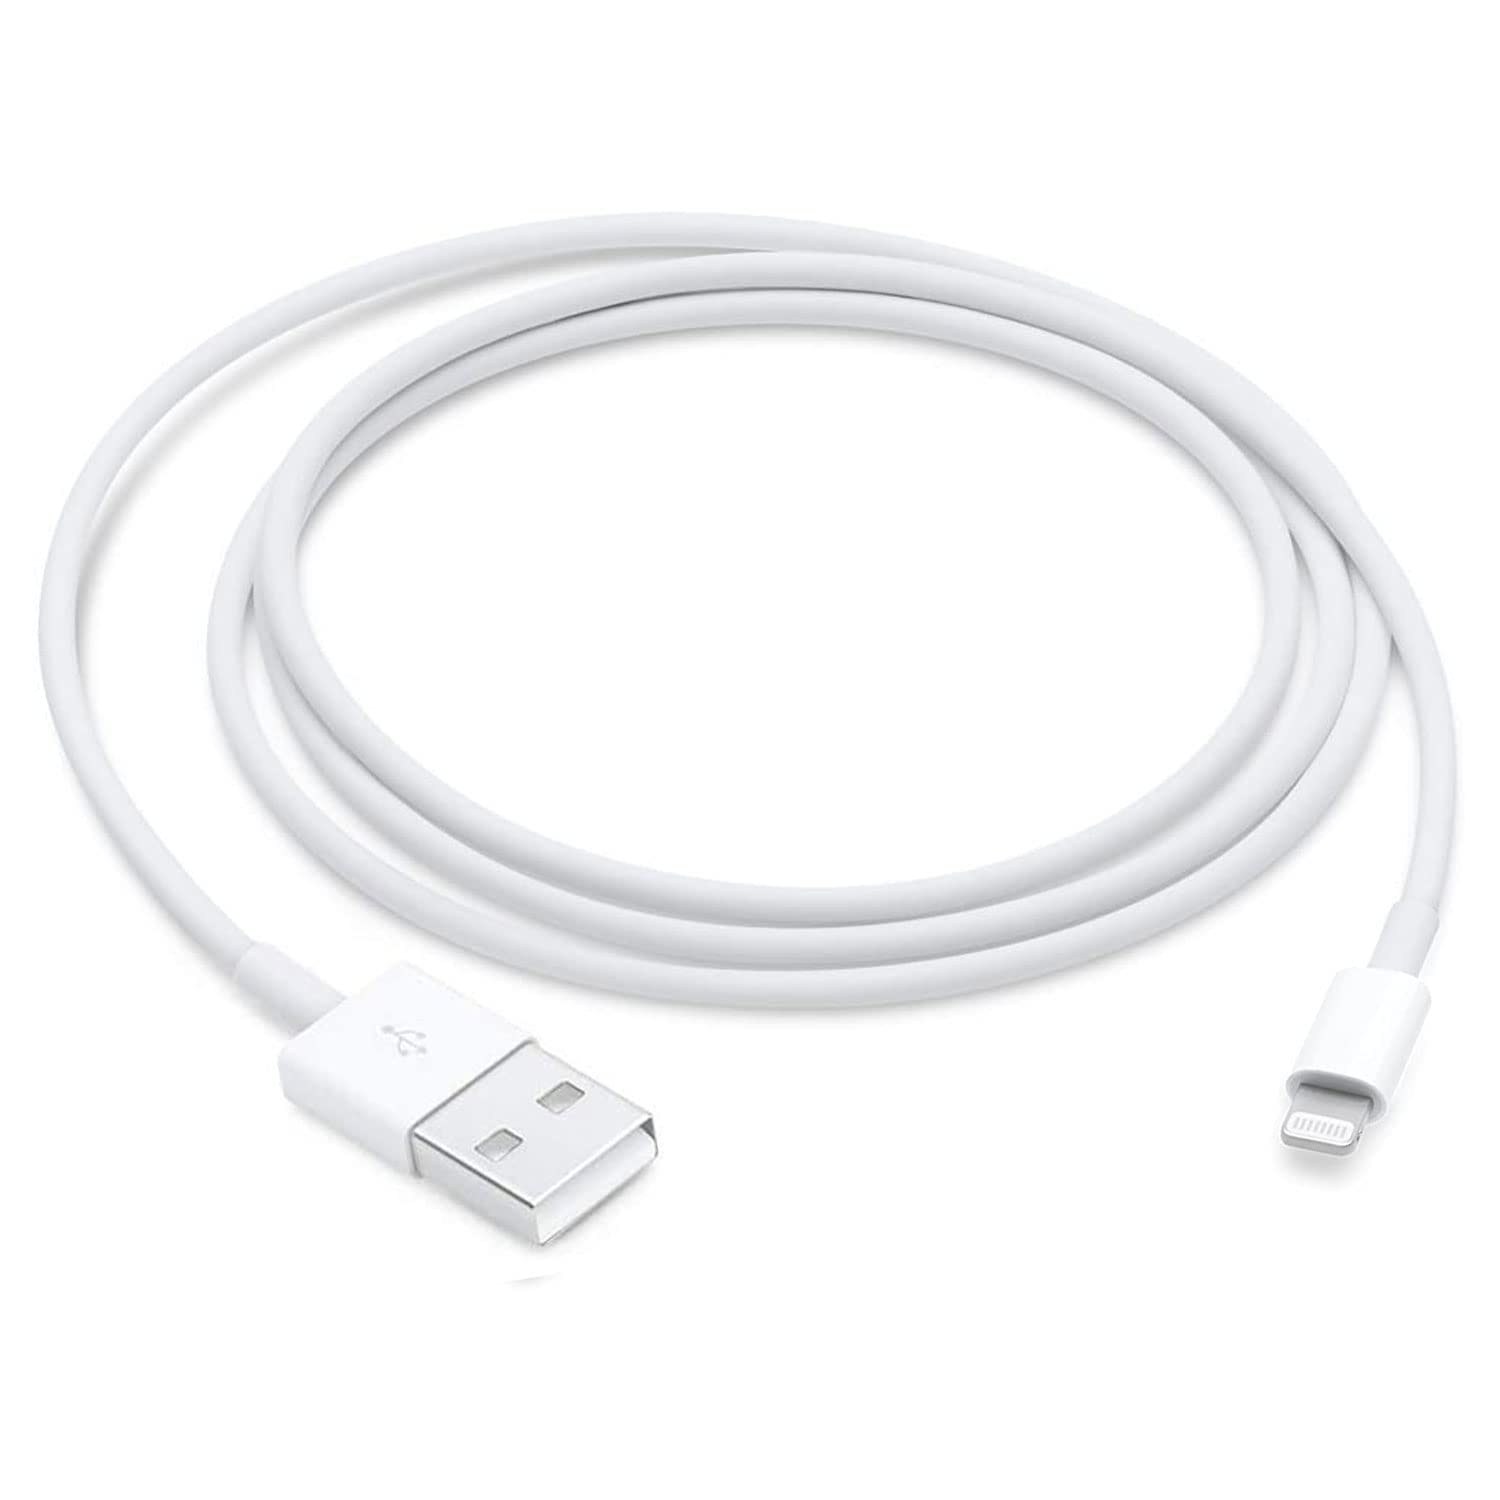 Try using a different USB cable
Check if the USB cable is compatible with CarPlay